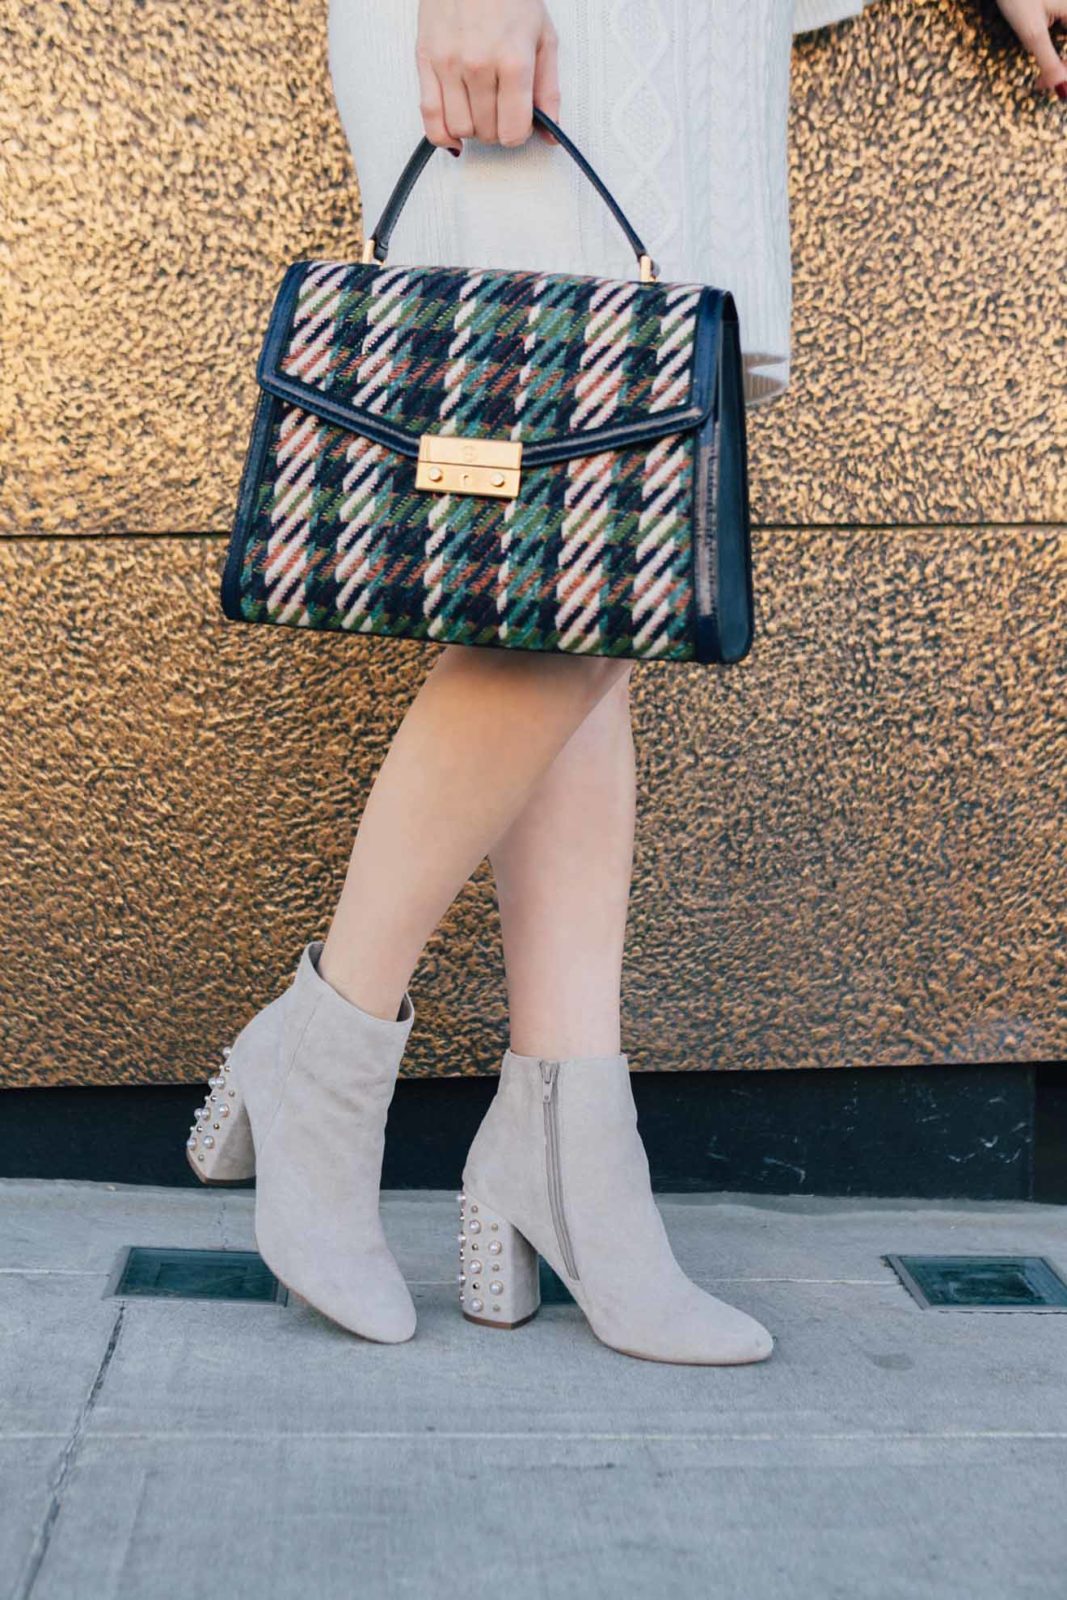 Laura Lily - Fashion Travel and Lifestyle Blog, Embellished Booties, Tory Burch dogtooth handbag, Nordstrom Sweater dress 1